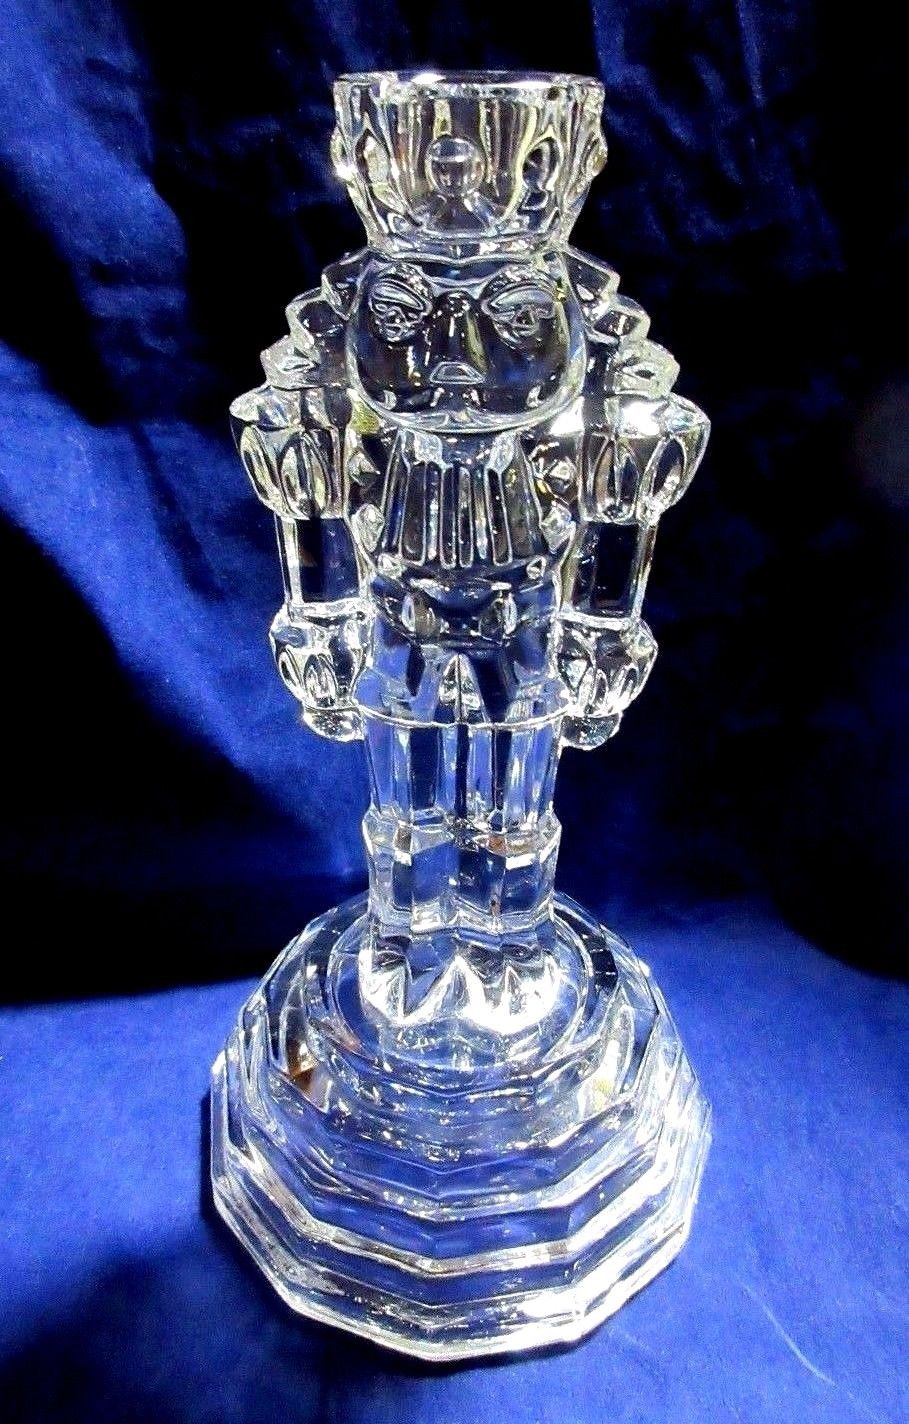 deplomb lead crystal vase of deplomb clear 24 lead crystal nutcracker candlestick holder free within 1 of 3free shipping